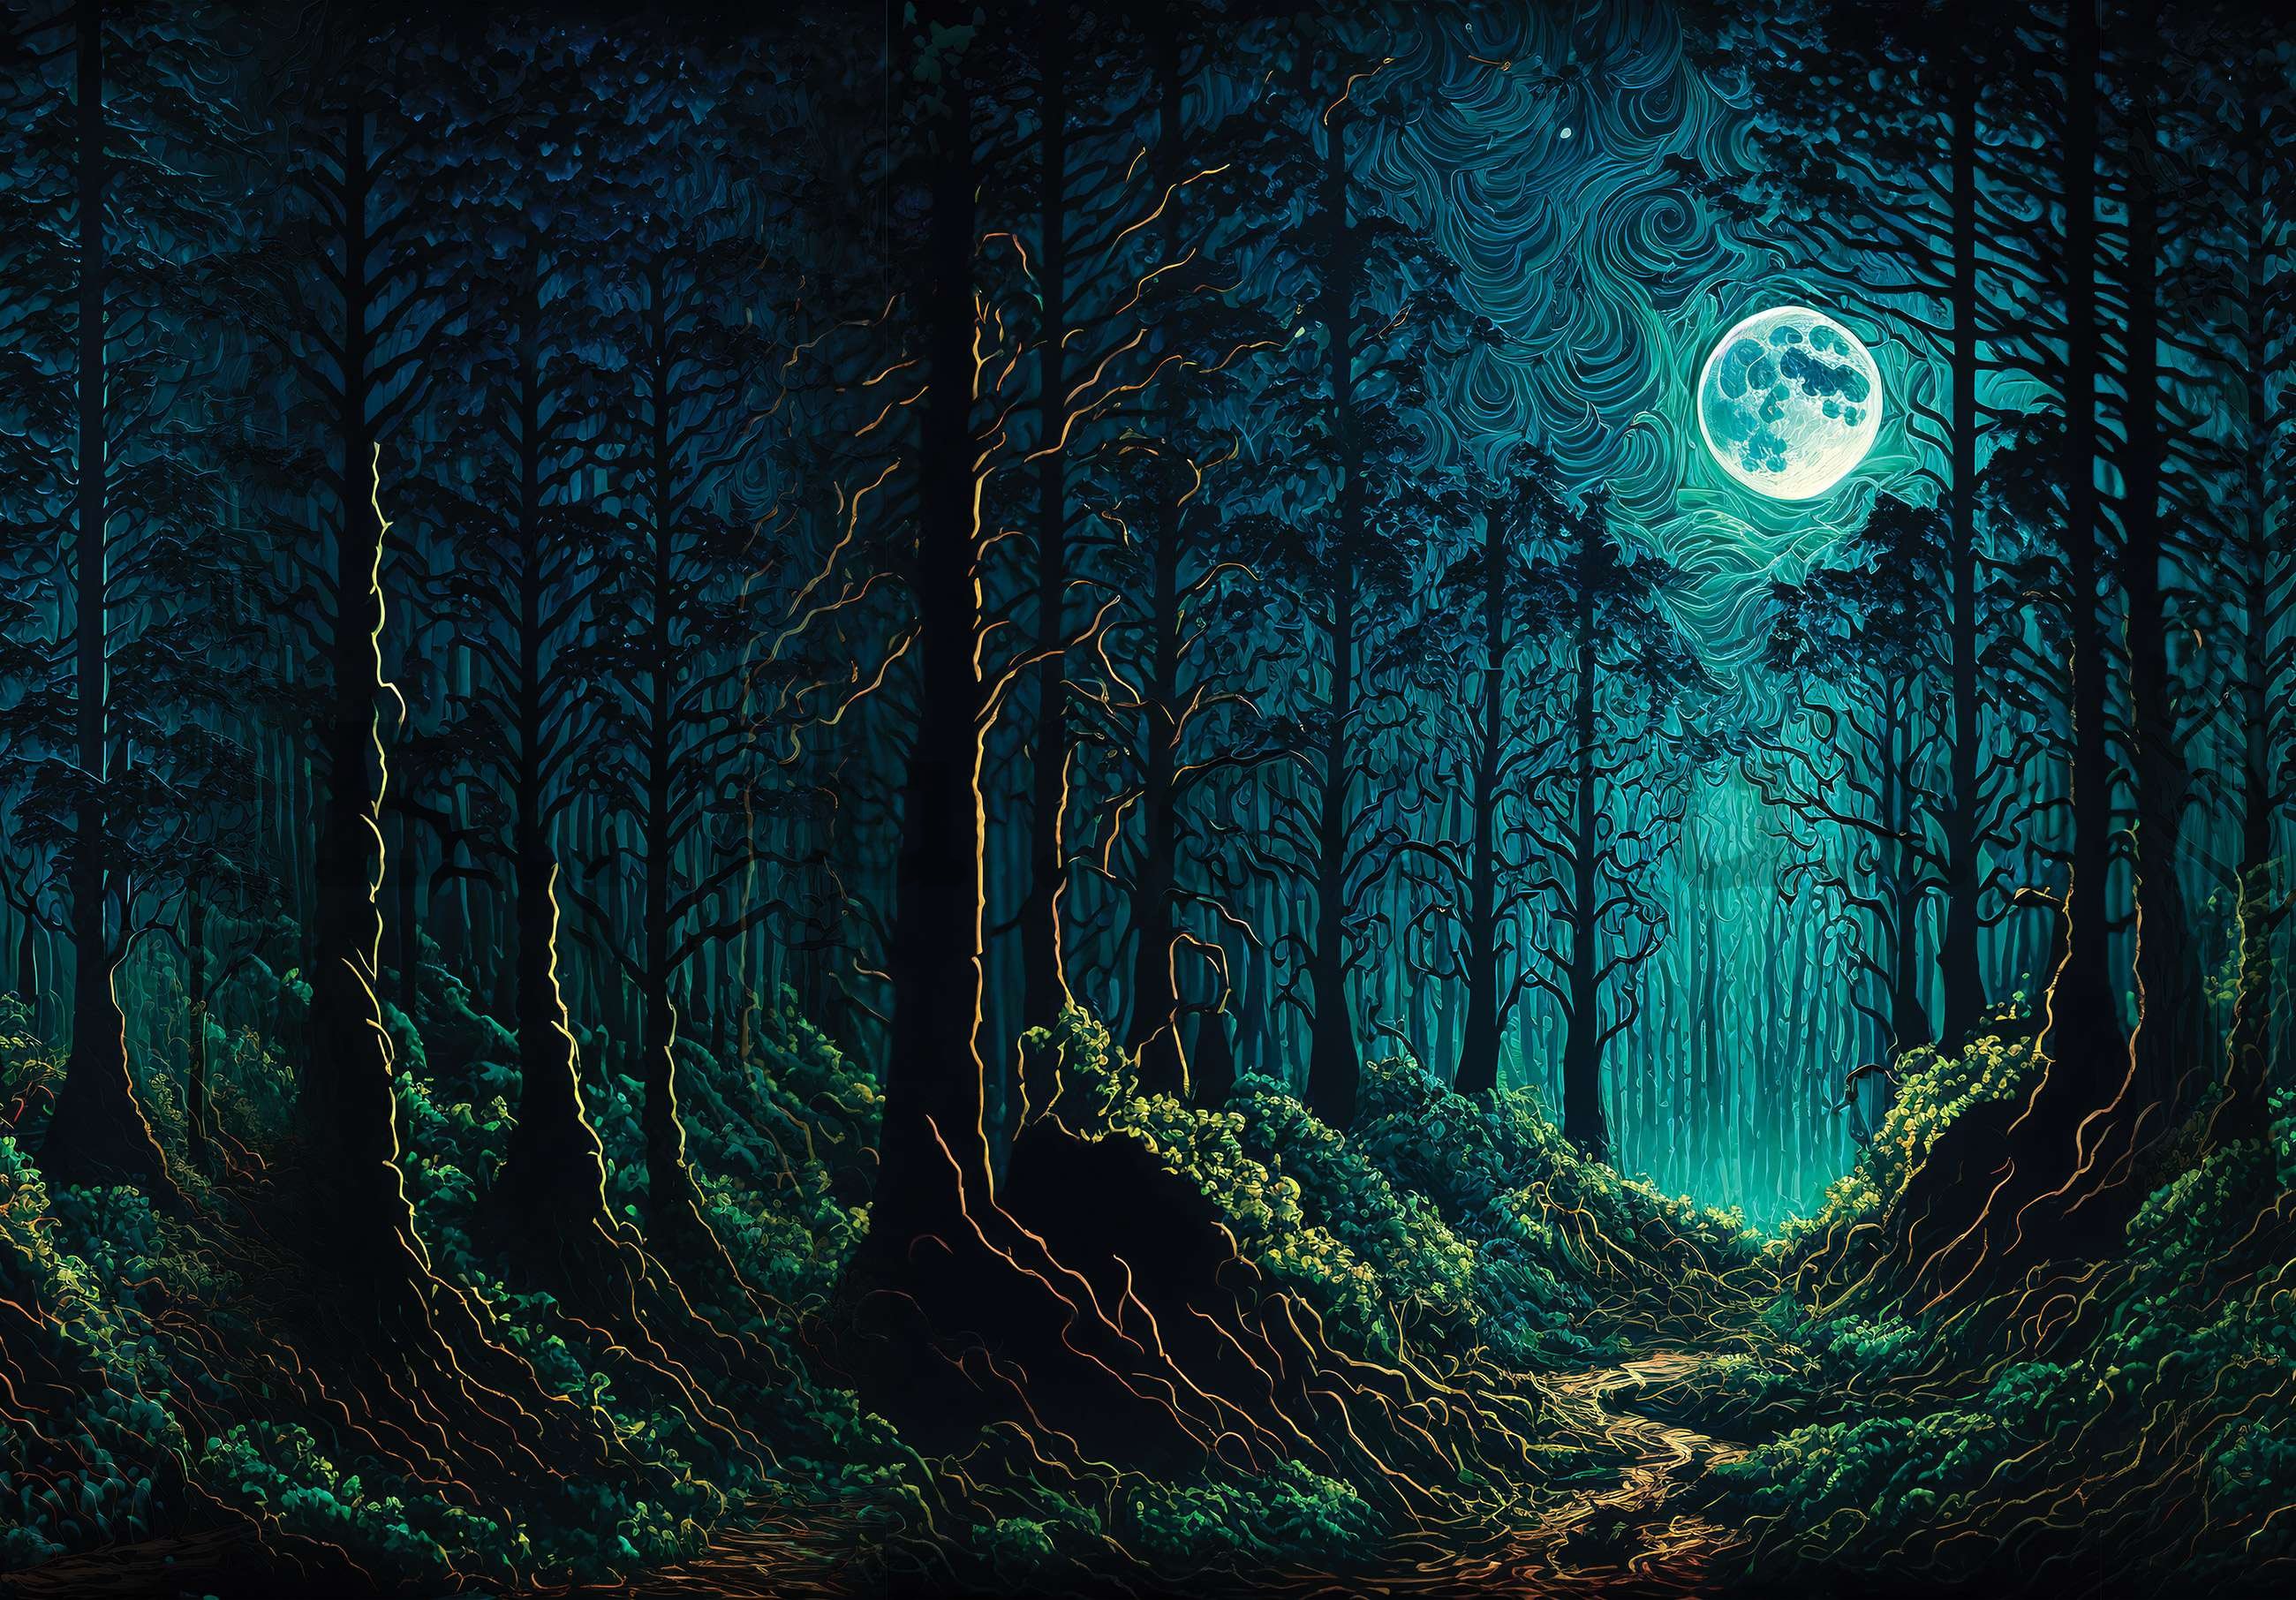 Wall mural vlies: Enchanted forest in the moonlight - 368x254 cm